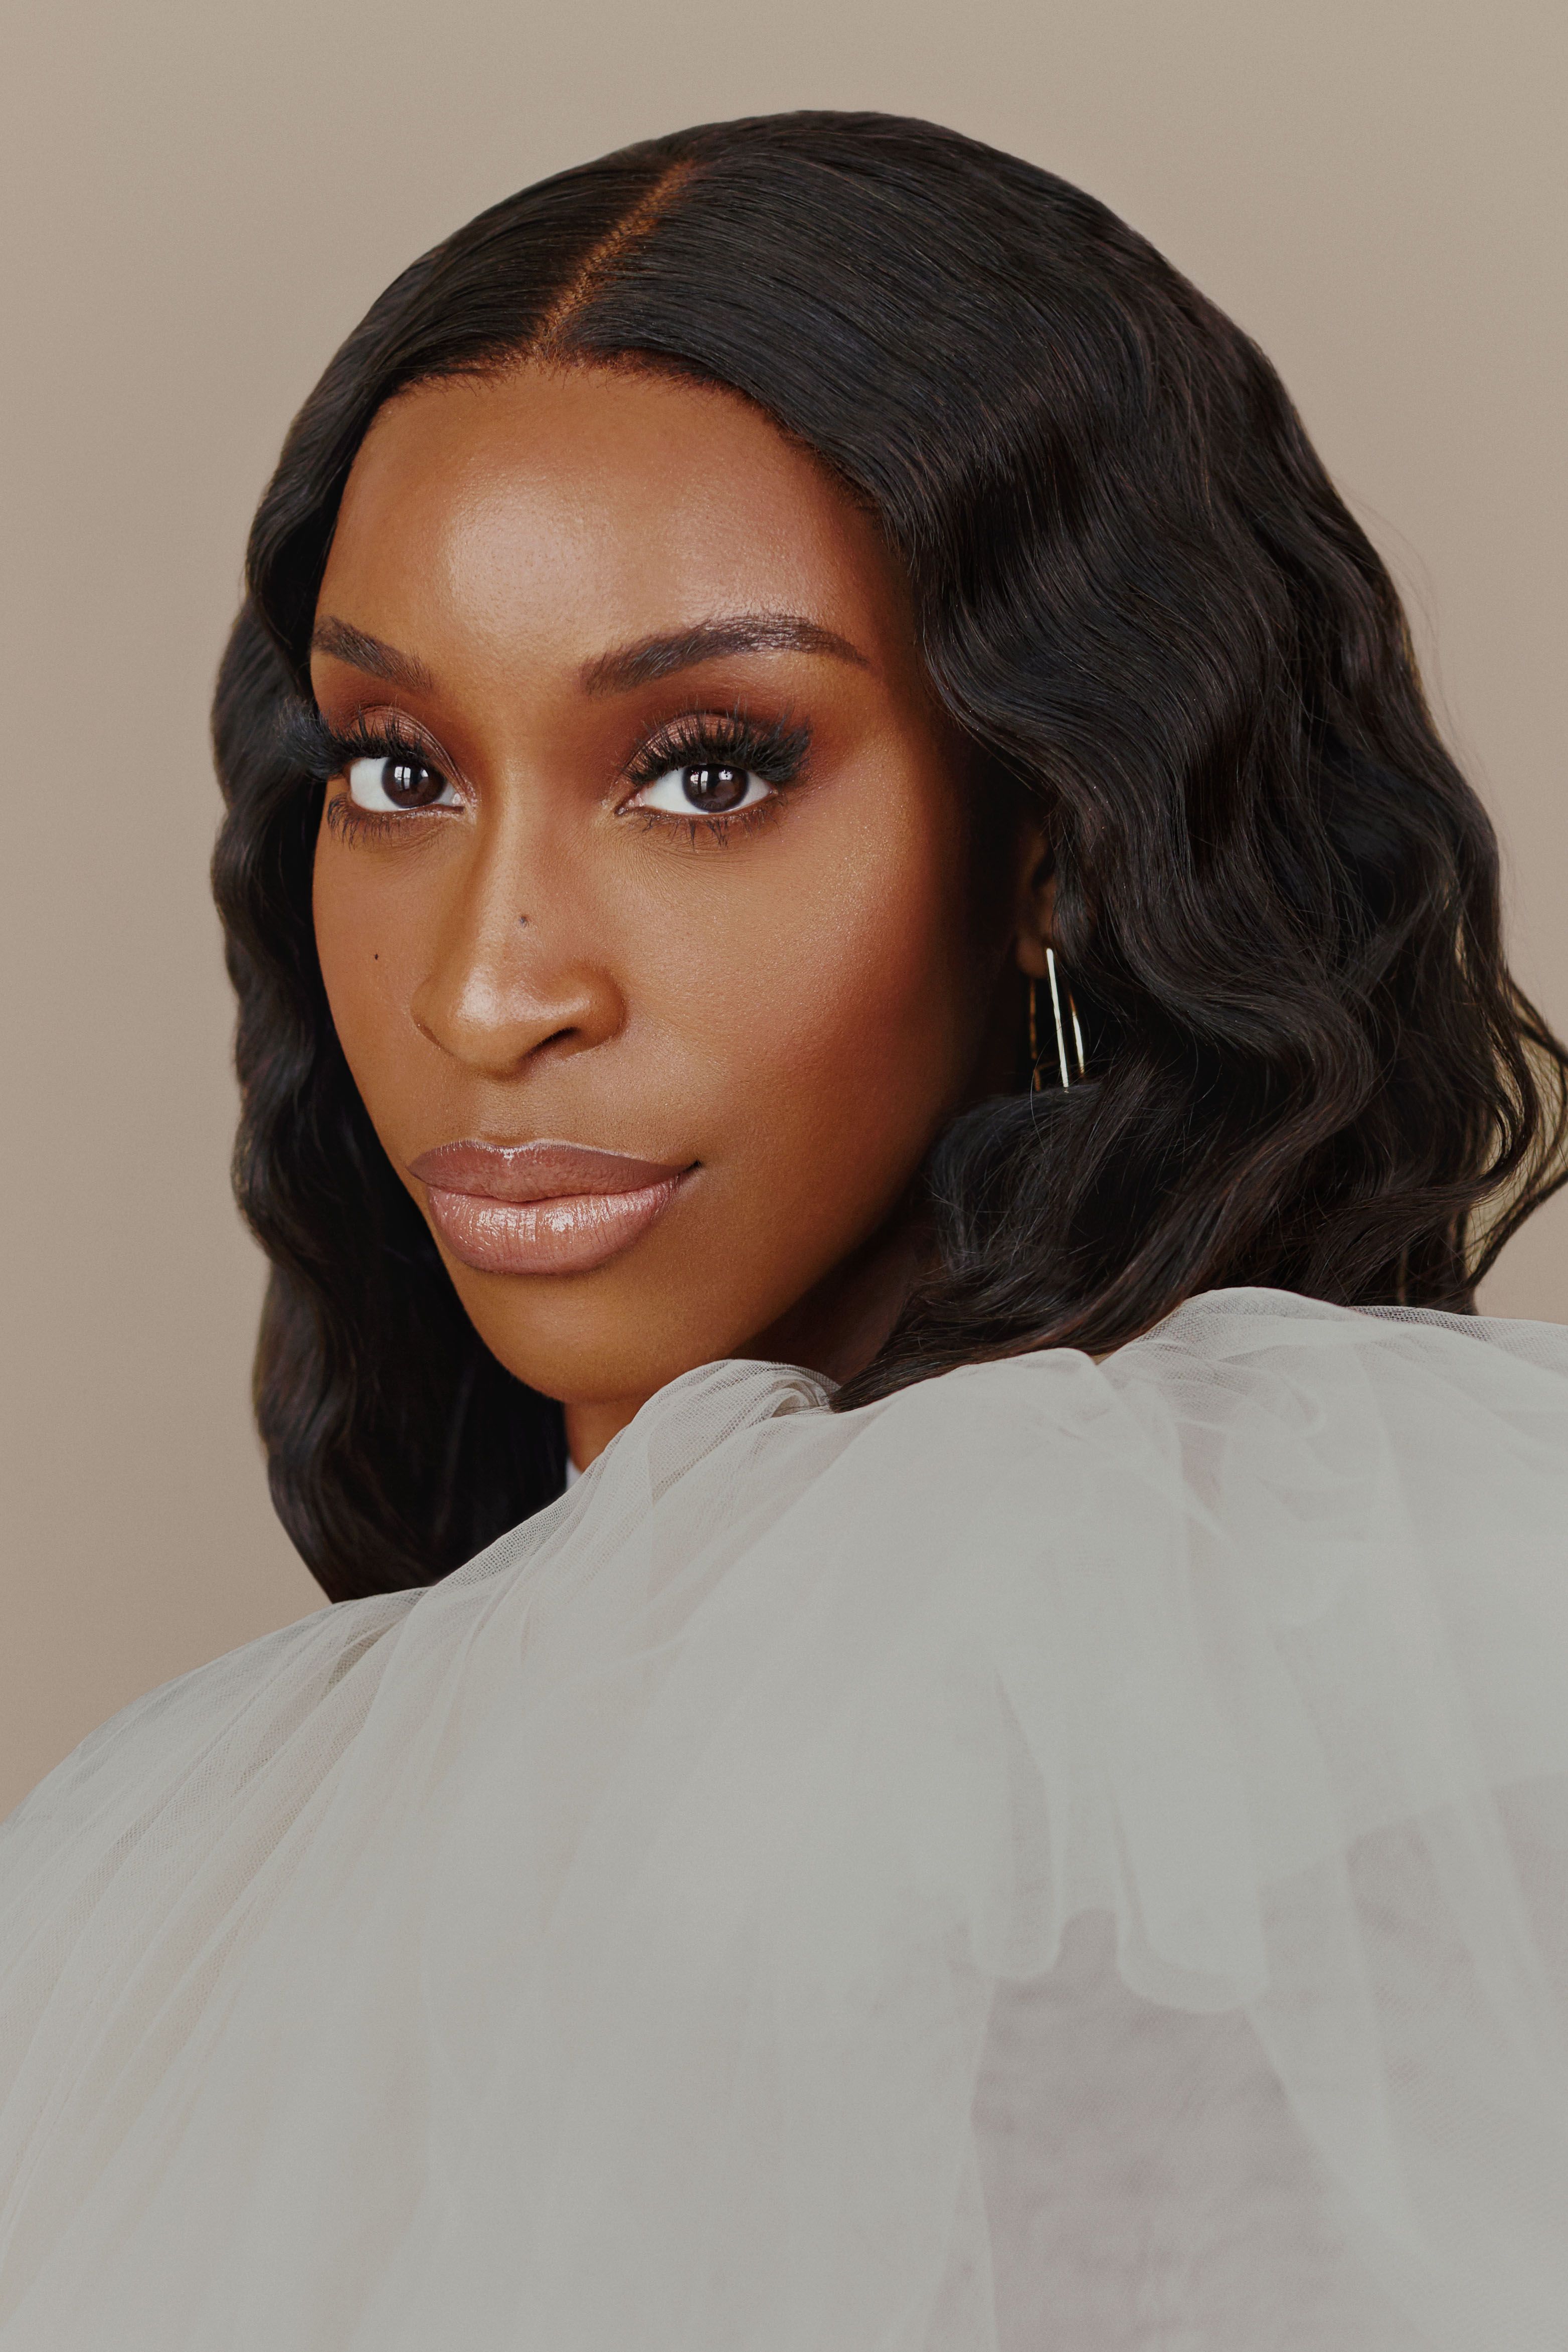 Influencer Jackie Aina on Her Upbringing and Plans After Beauty photo